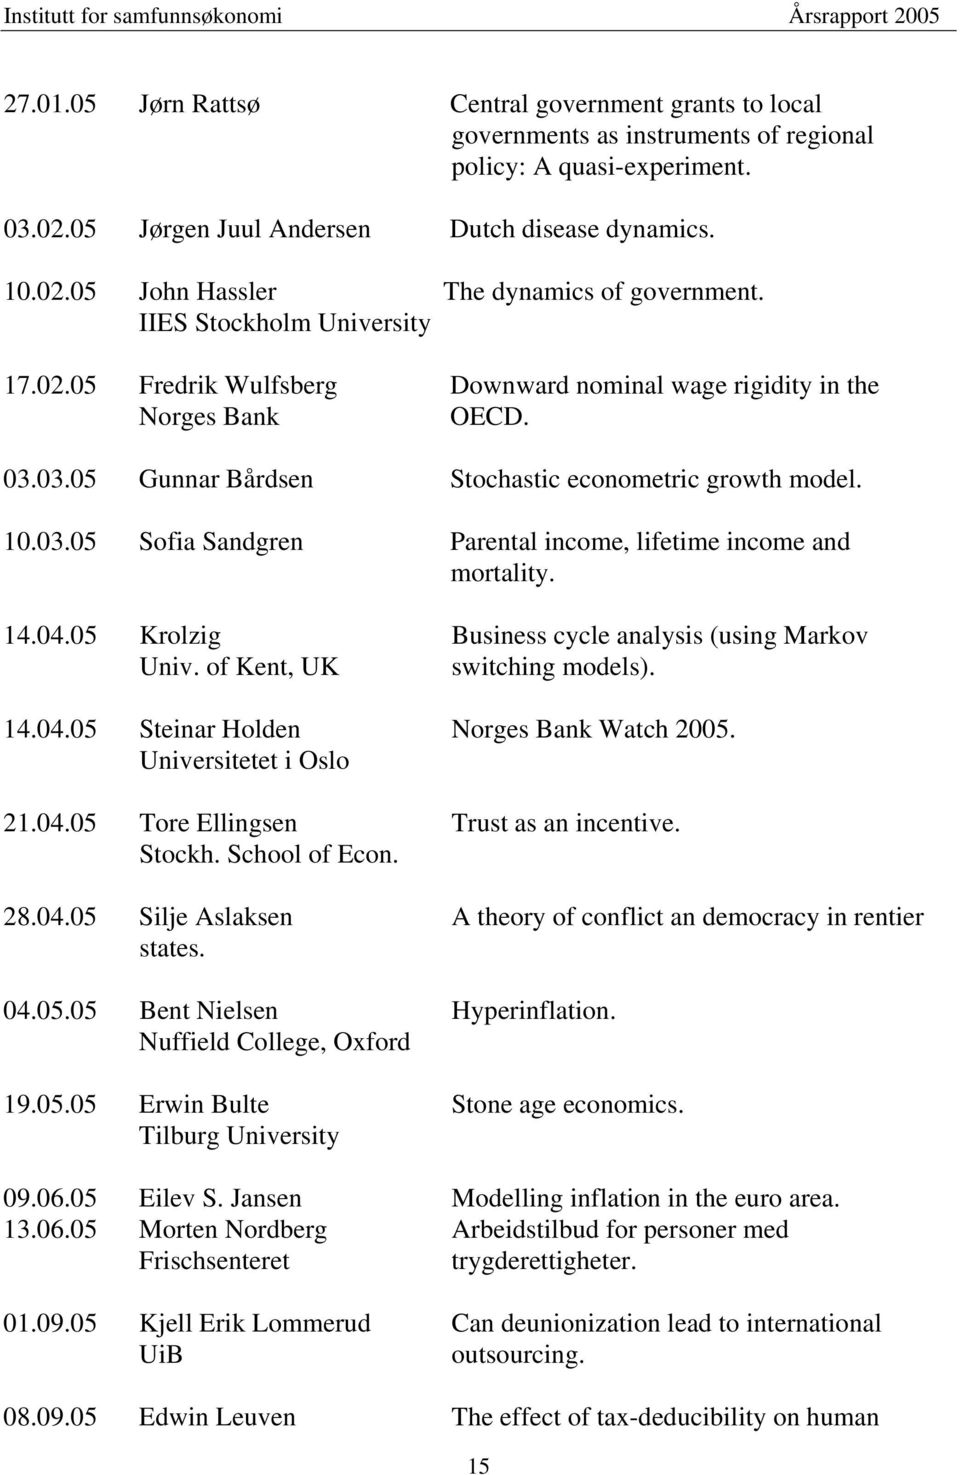 14.04.05 Krolzig Business cycle analysis (using Markov Univ. of Kent, UK switching models). 14.04.05 Steinar Holden Norges Bank Watch 2005. Universitetet i Oslo 21.04.05 Tore Ellingsen Trust as an incentive.